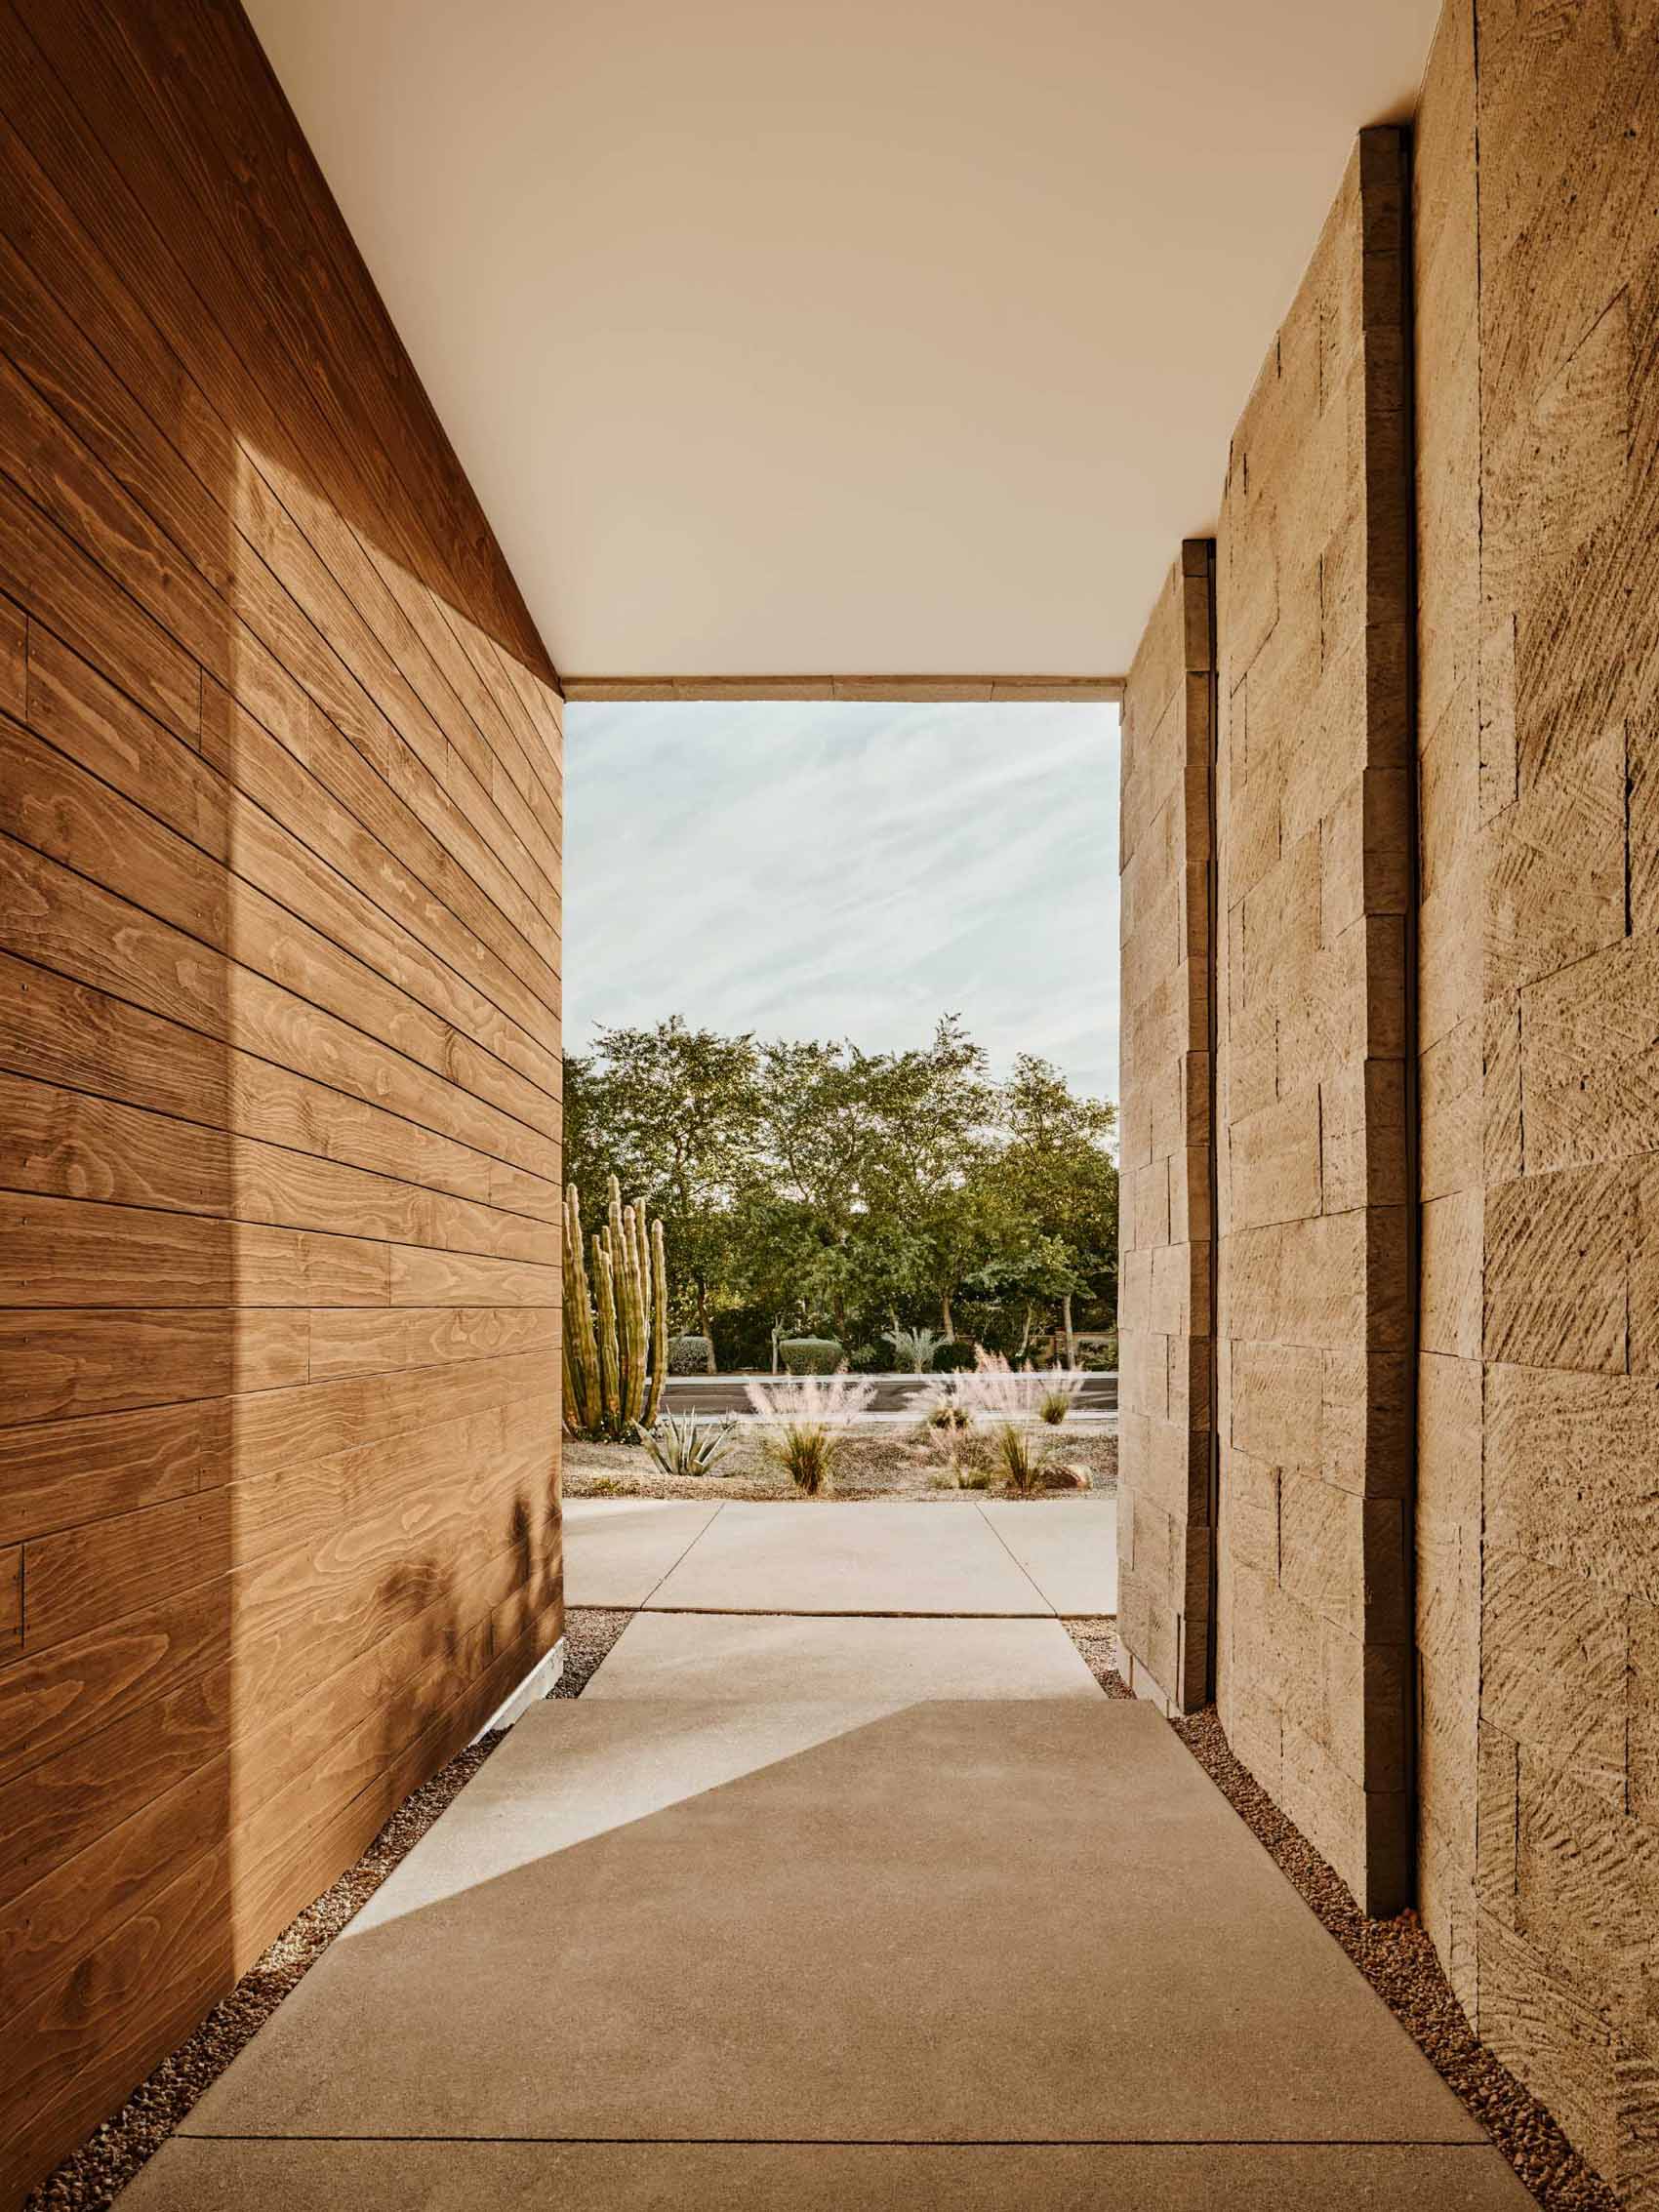 The solid travertine masses of the residence pay homage to the rugged mountains that surround the property, anchoring the dwelling to its natural context.